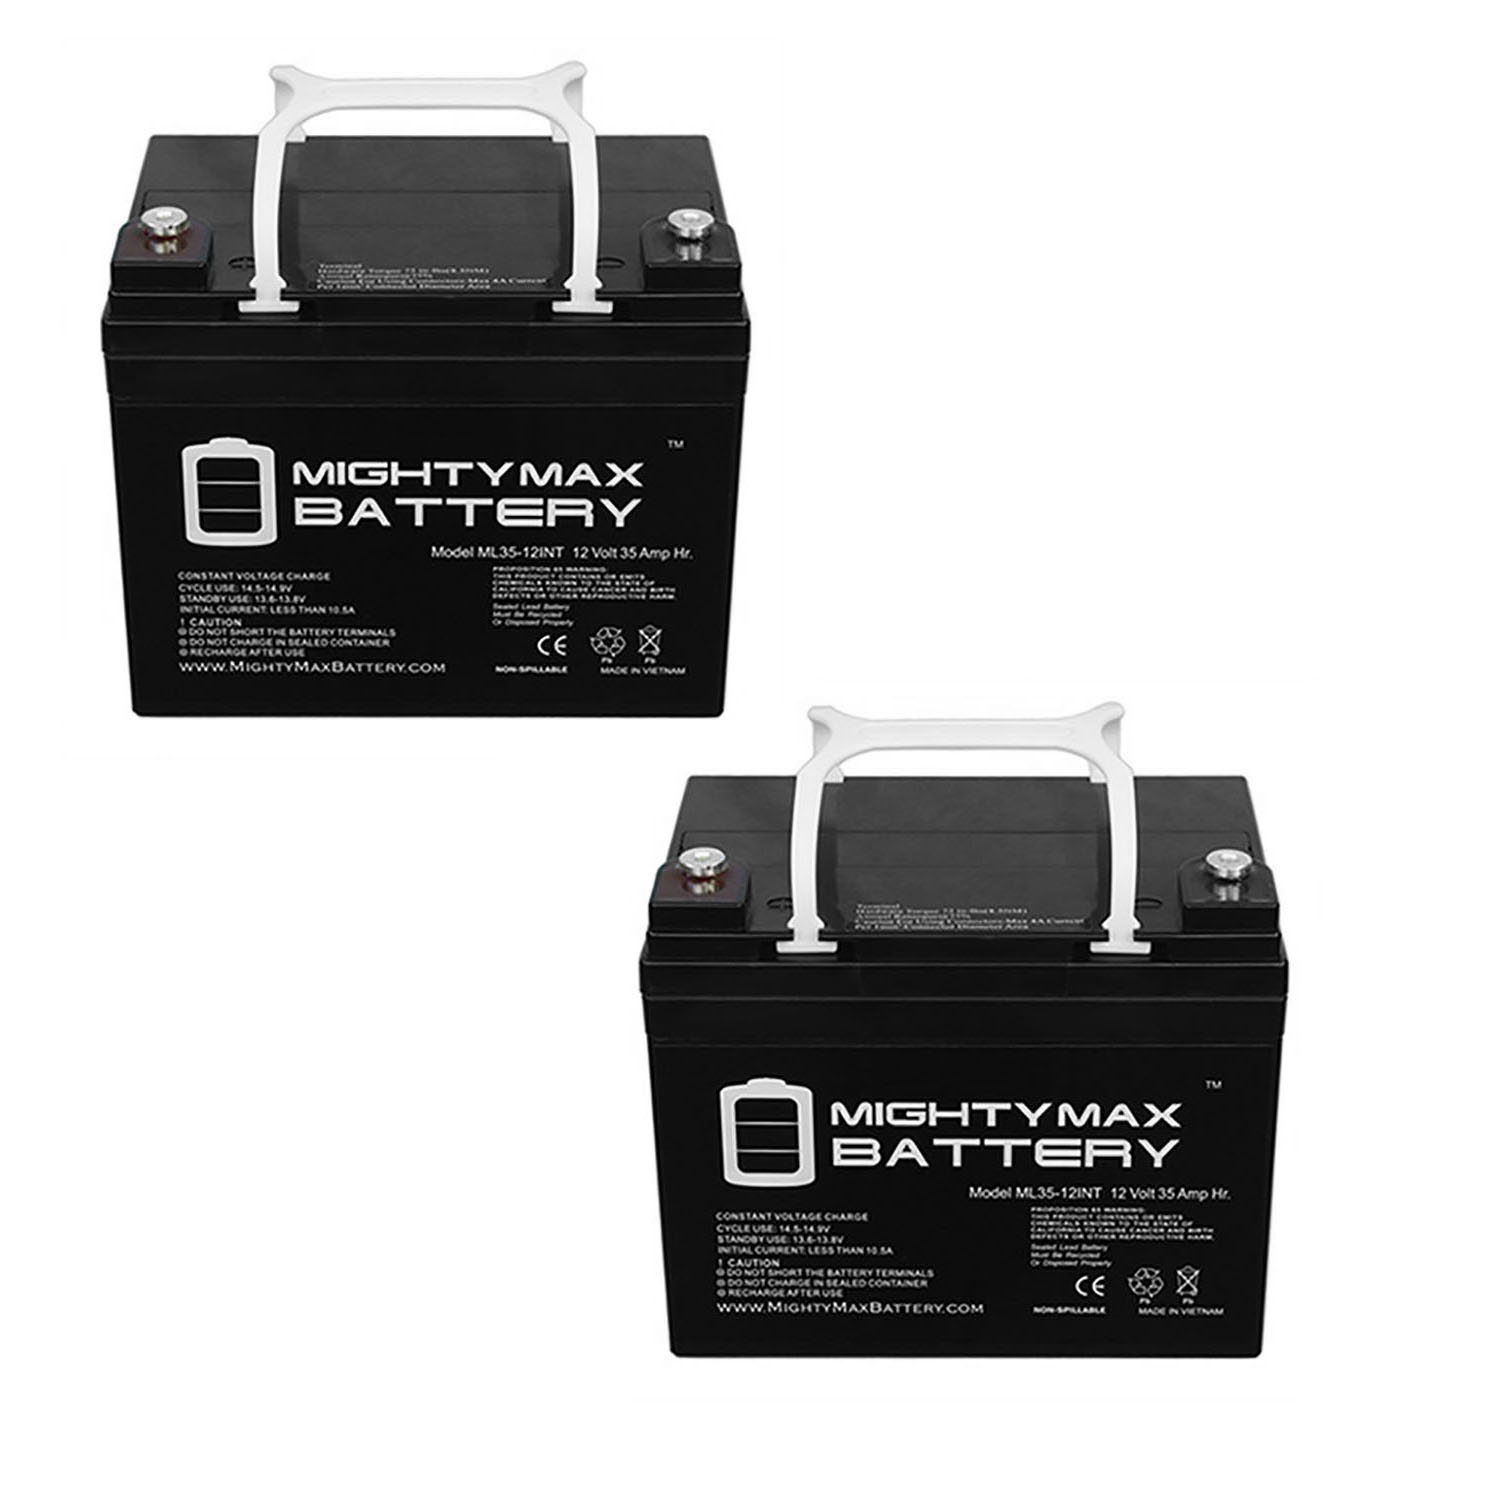 12V 35AH INT Replacement Battery for Cub Cadet 2176 - 2 Pack